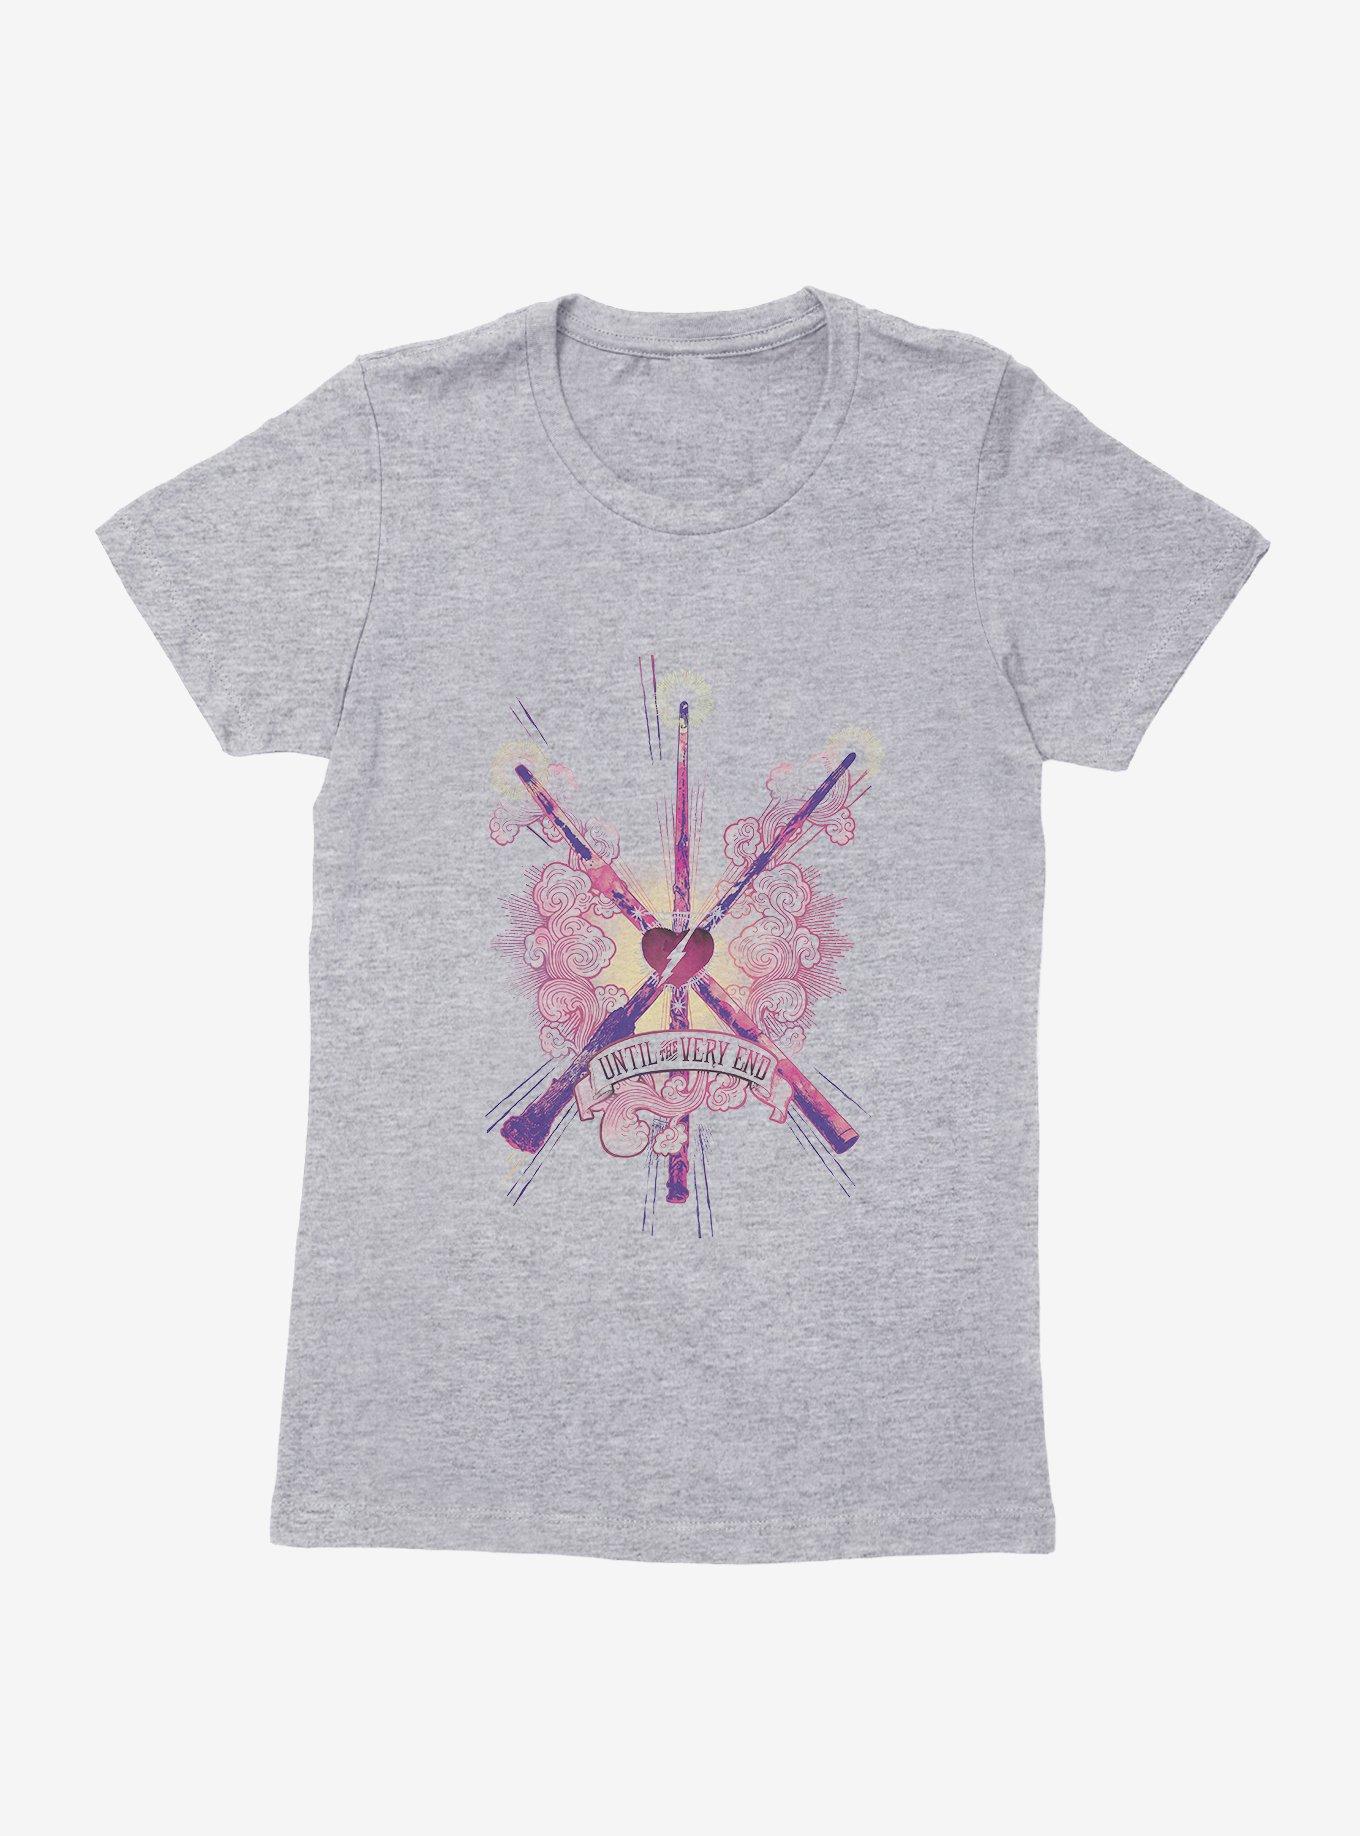 Harry Potter Until The Very End Wands Extra Soft Girls Heather Grey T-Shirt, HEATHER, hi-res